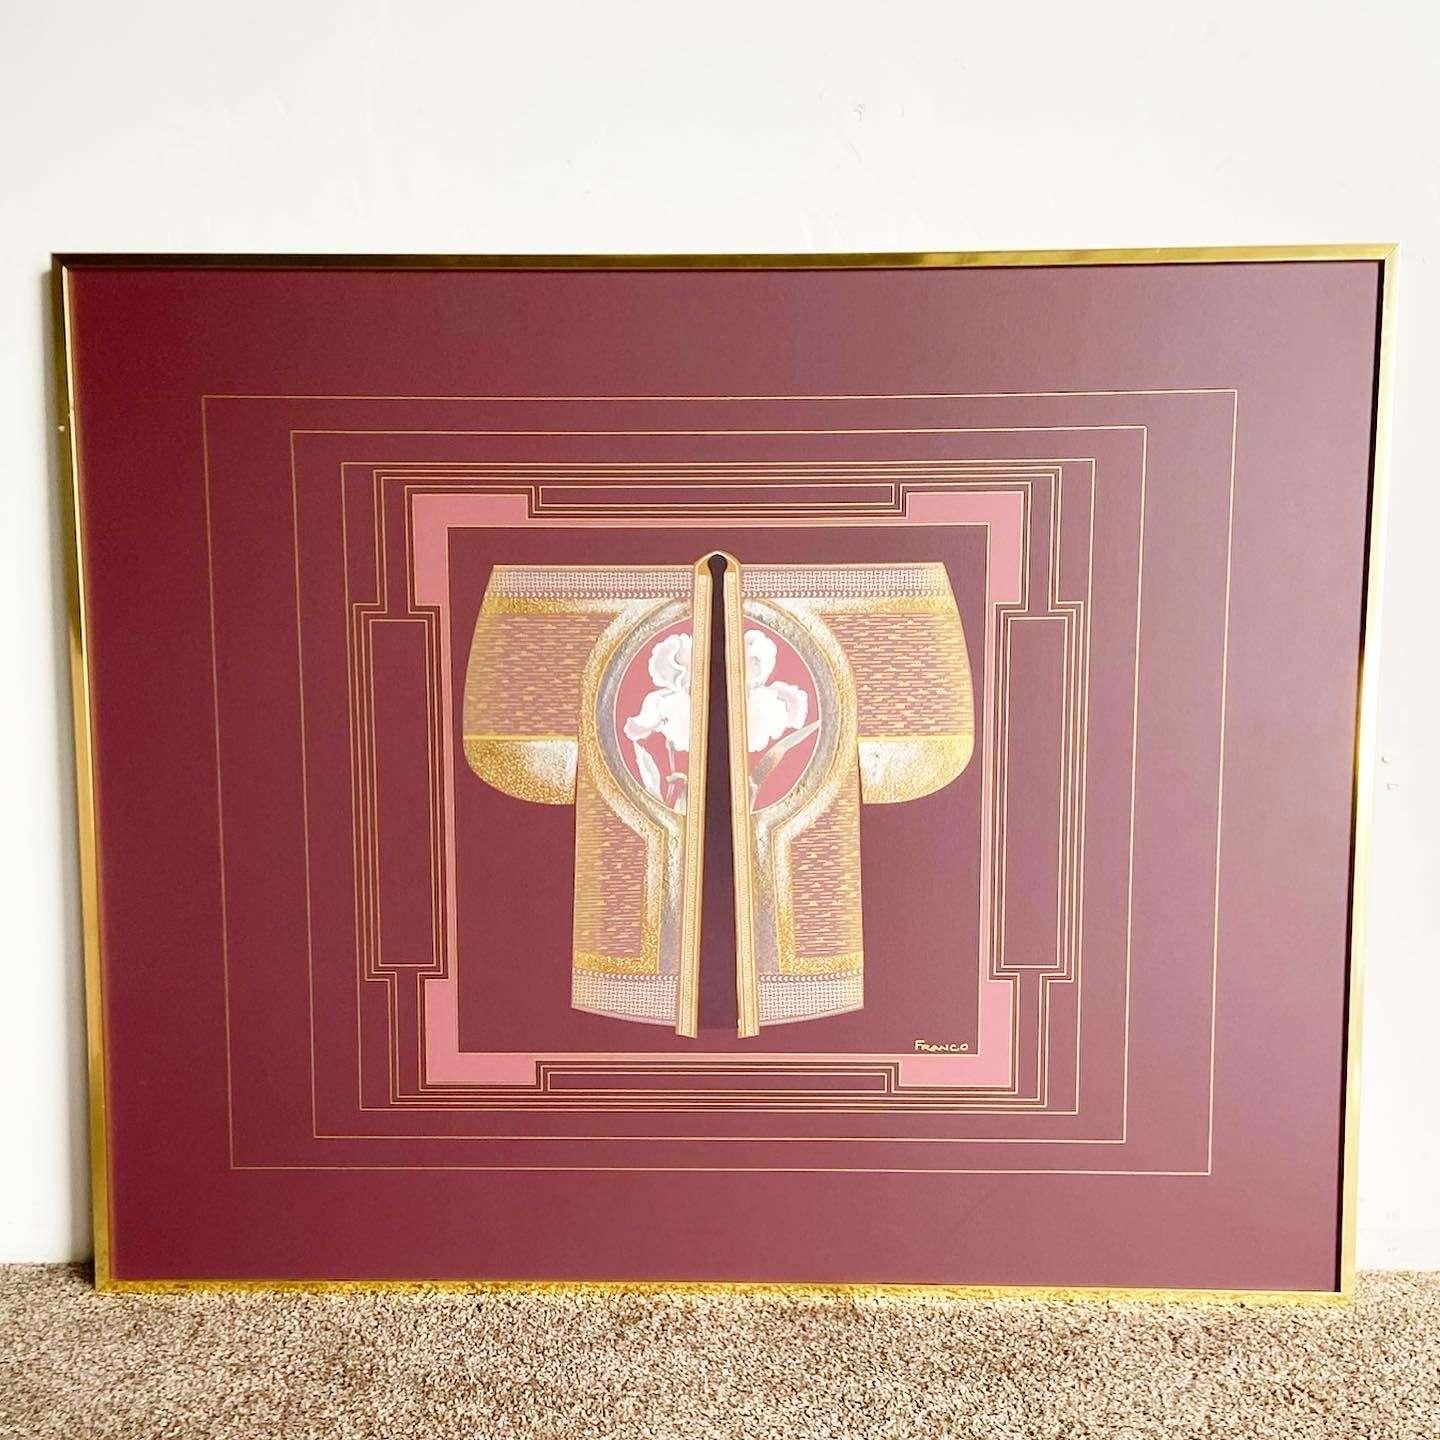 Incredible vintage art deco revival framed painting singled by Franco. Features a central figure with gold pink and purple.